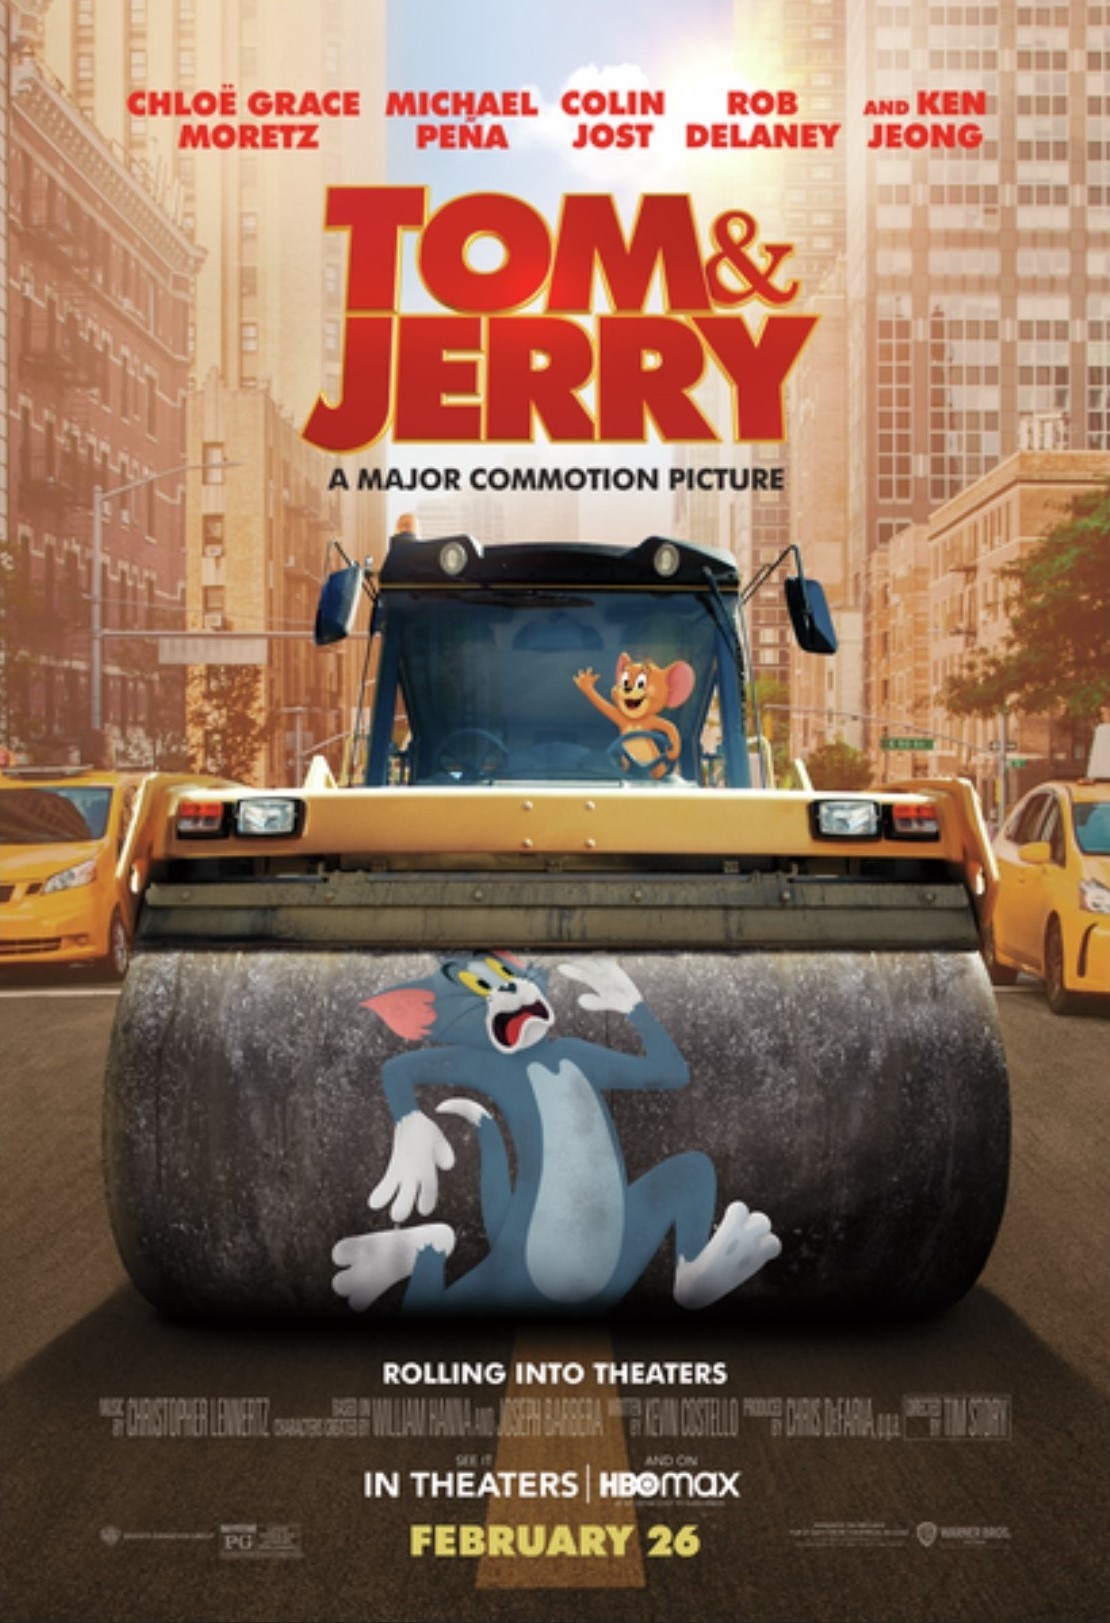 Tom & Jerry The Movie: Press Junket & Fun Facts About the Film